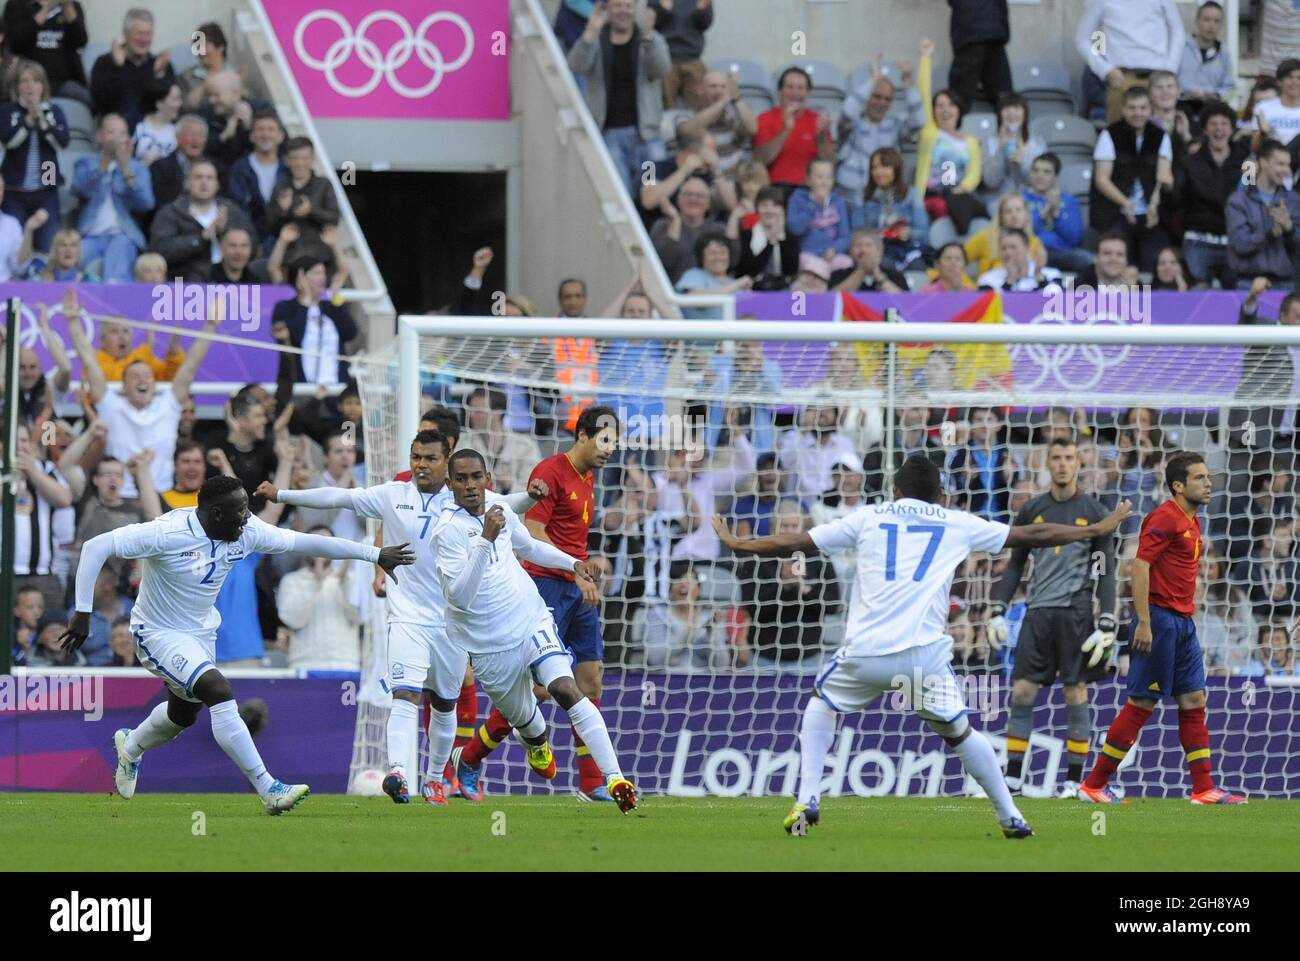 Honduras' Jerry Bengtson (C) celebrates scoring his side's first goal during the London Olympic 2012 first round Group D men's match between Spain v Honduras at the St. James' Park, Newcastle upon Tyne on the 29th July 2012. Stock Photo